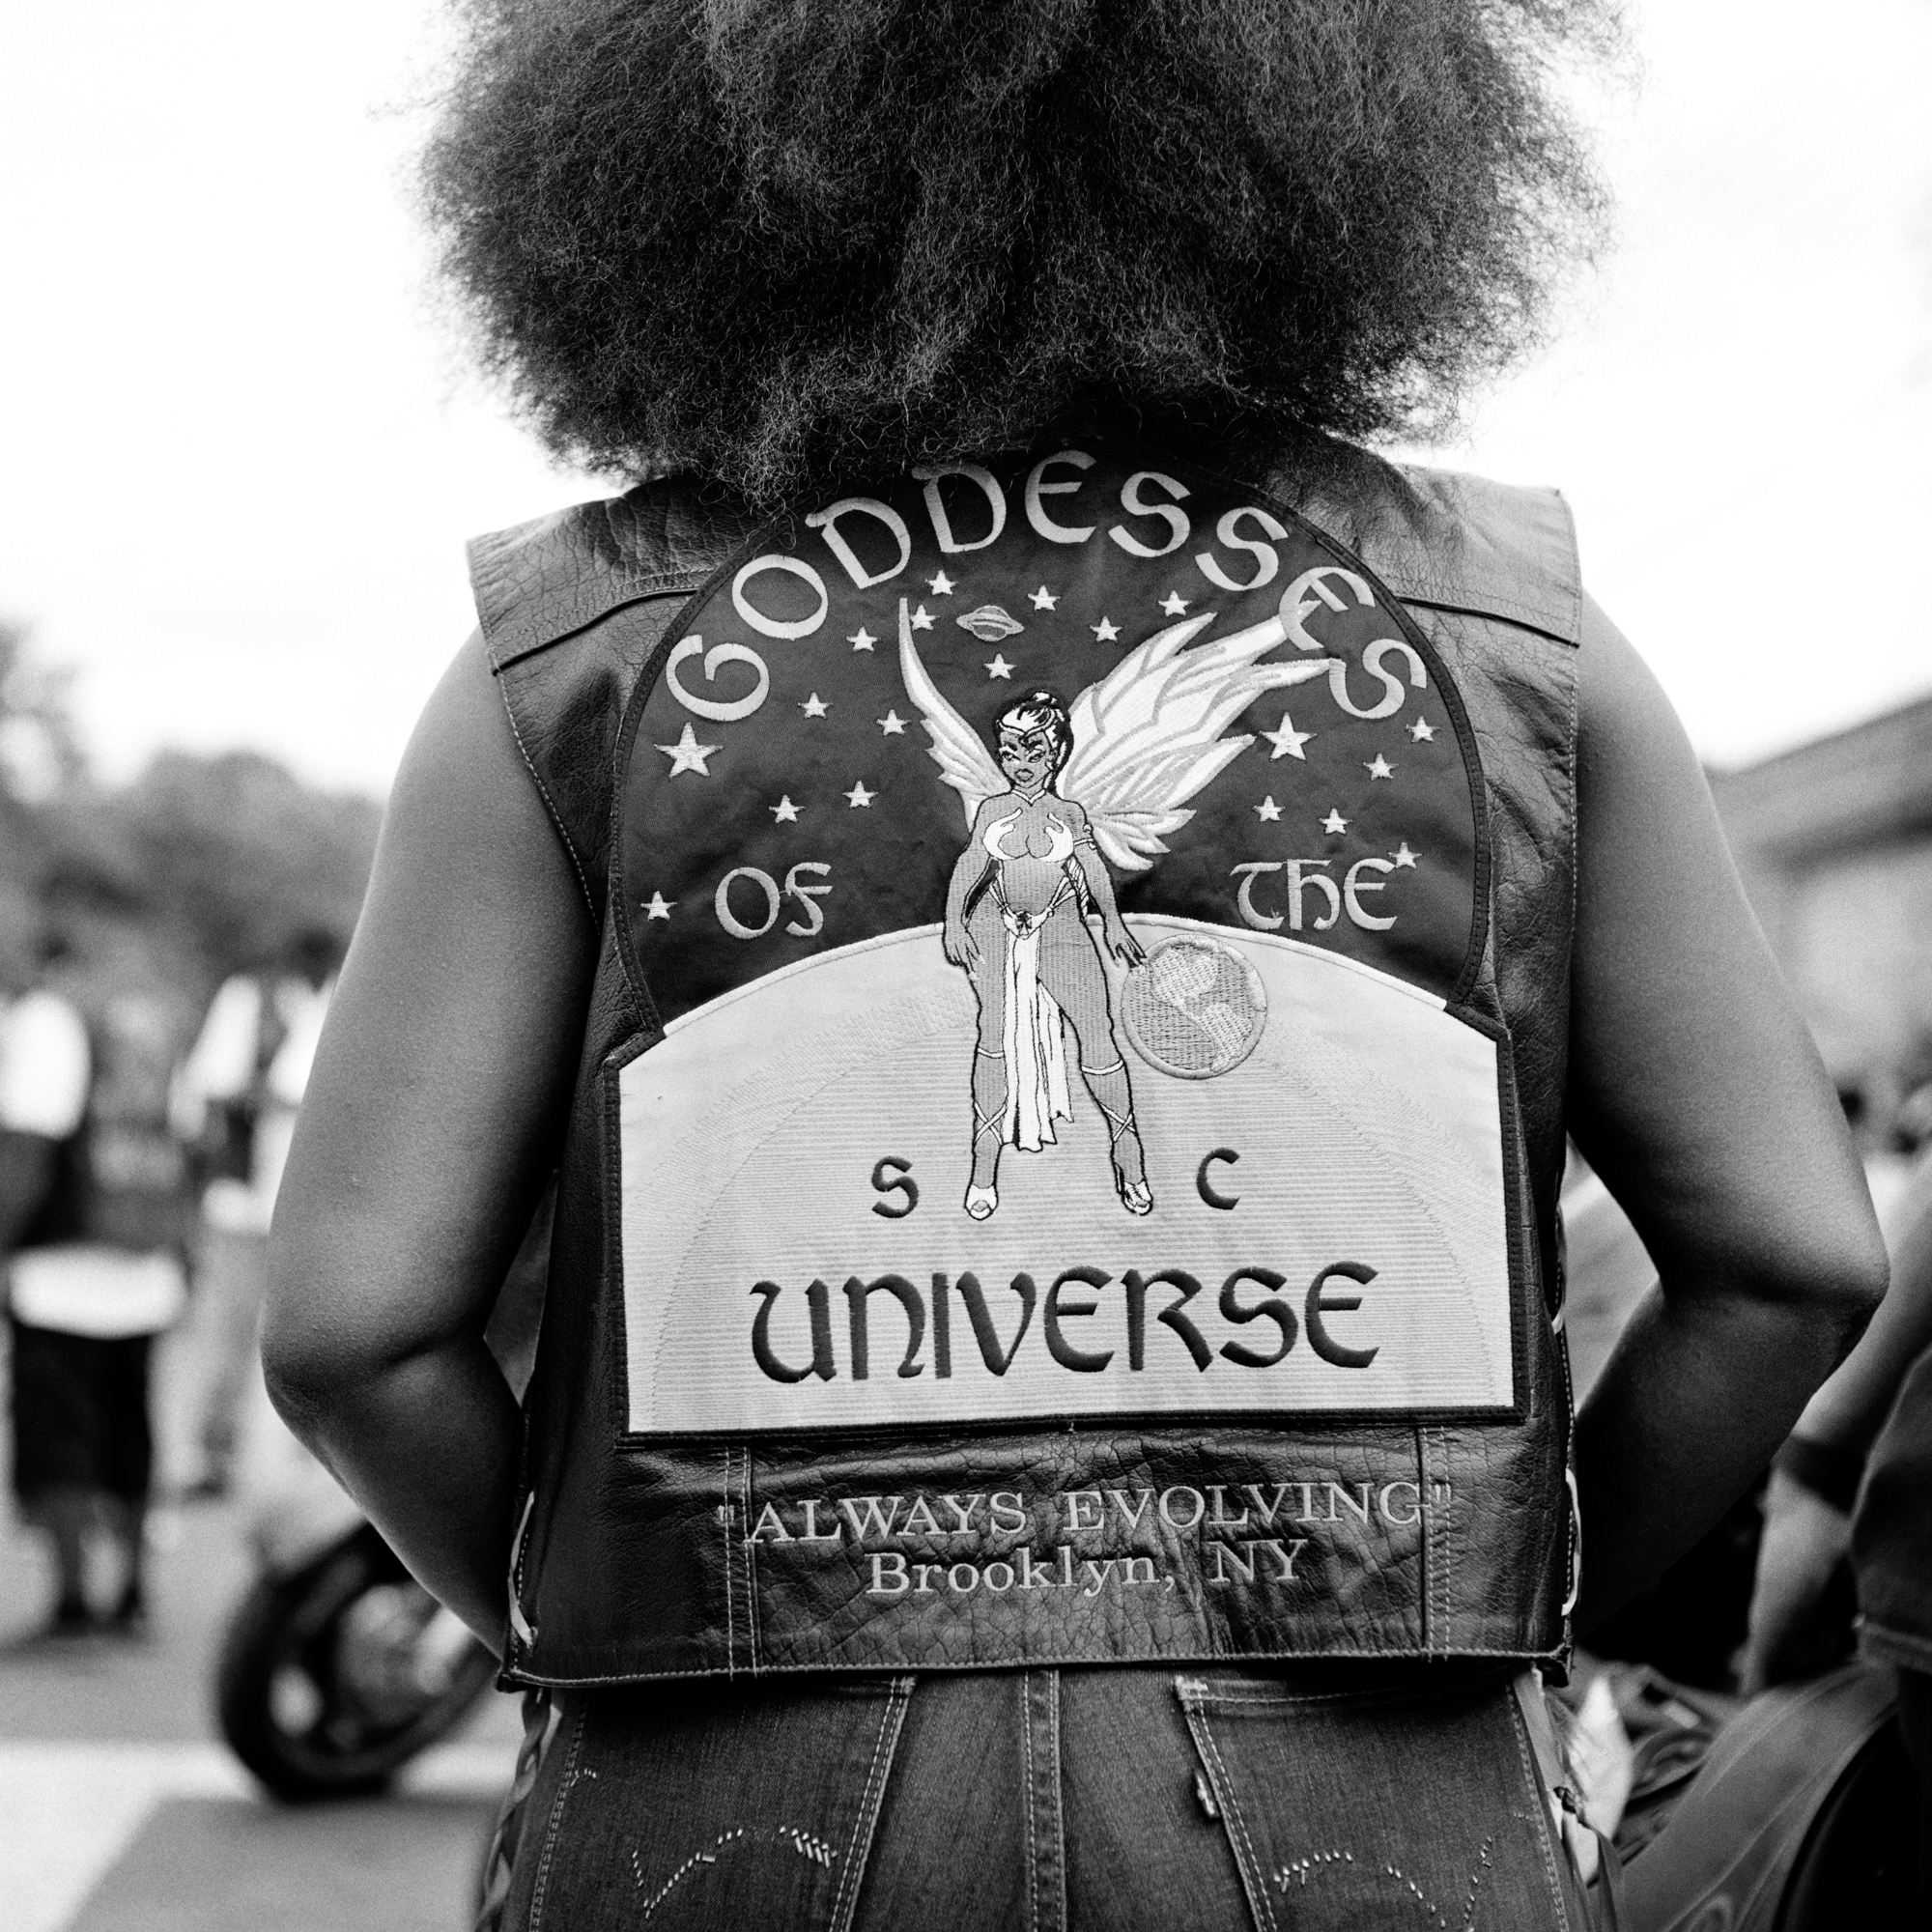 Photographing New York's Black motorcycle clubs